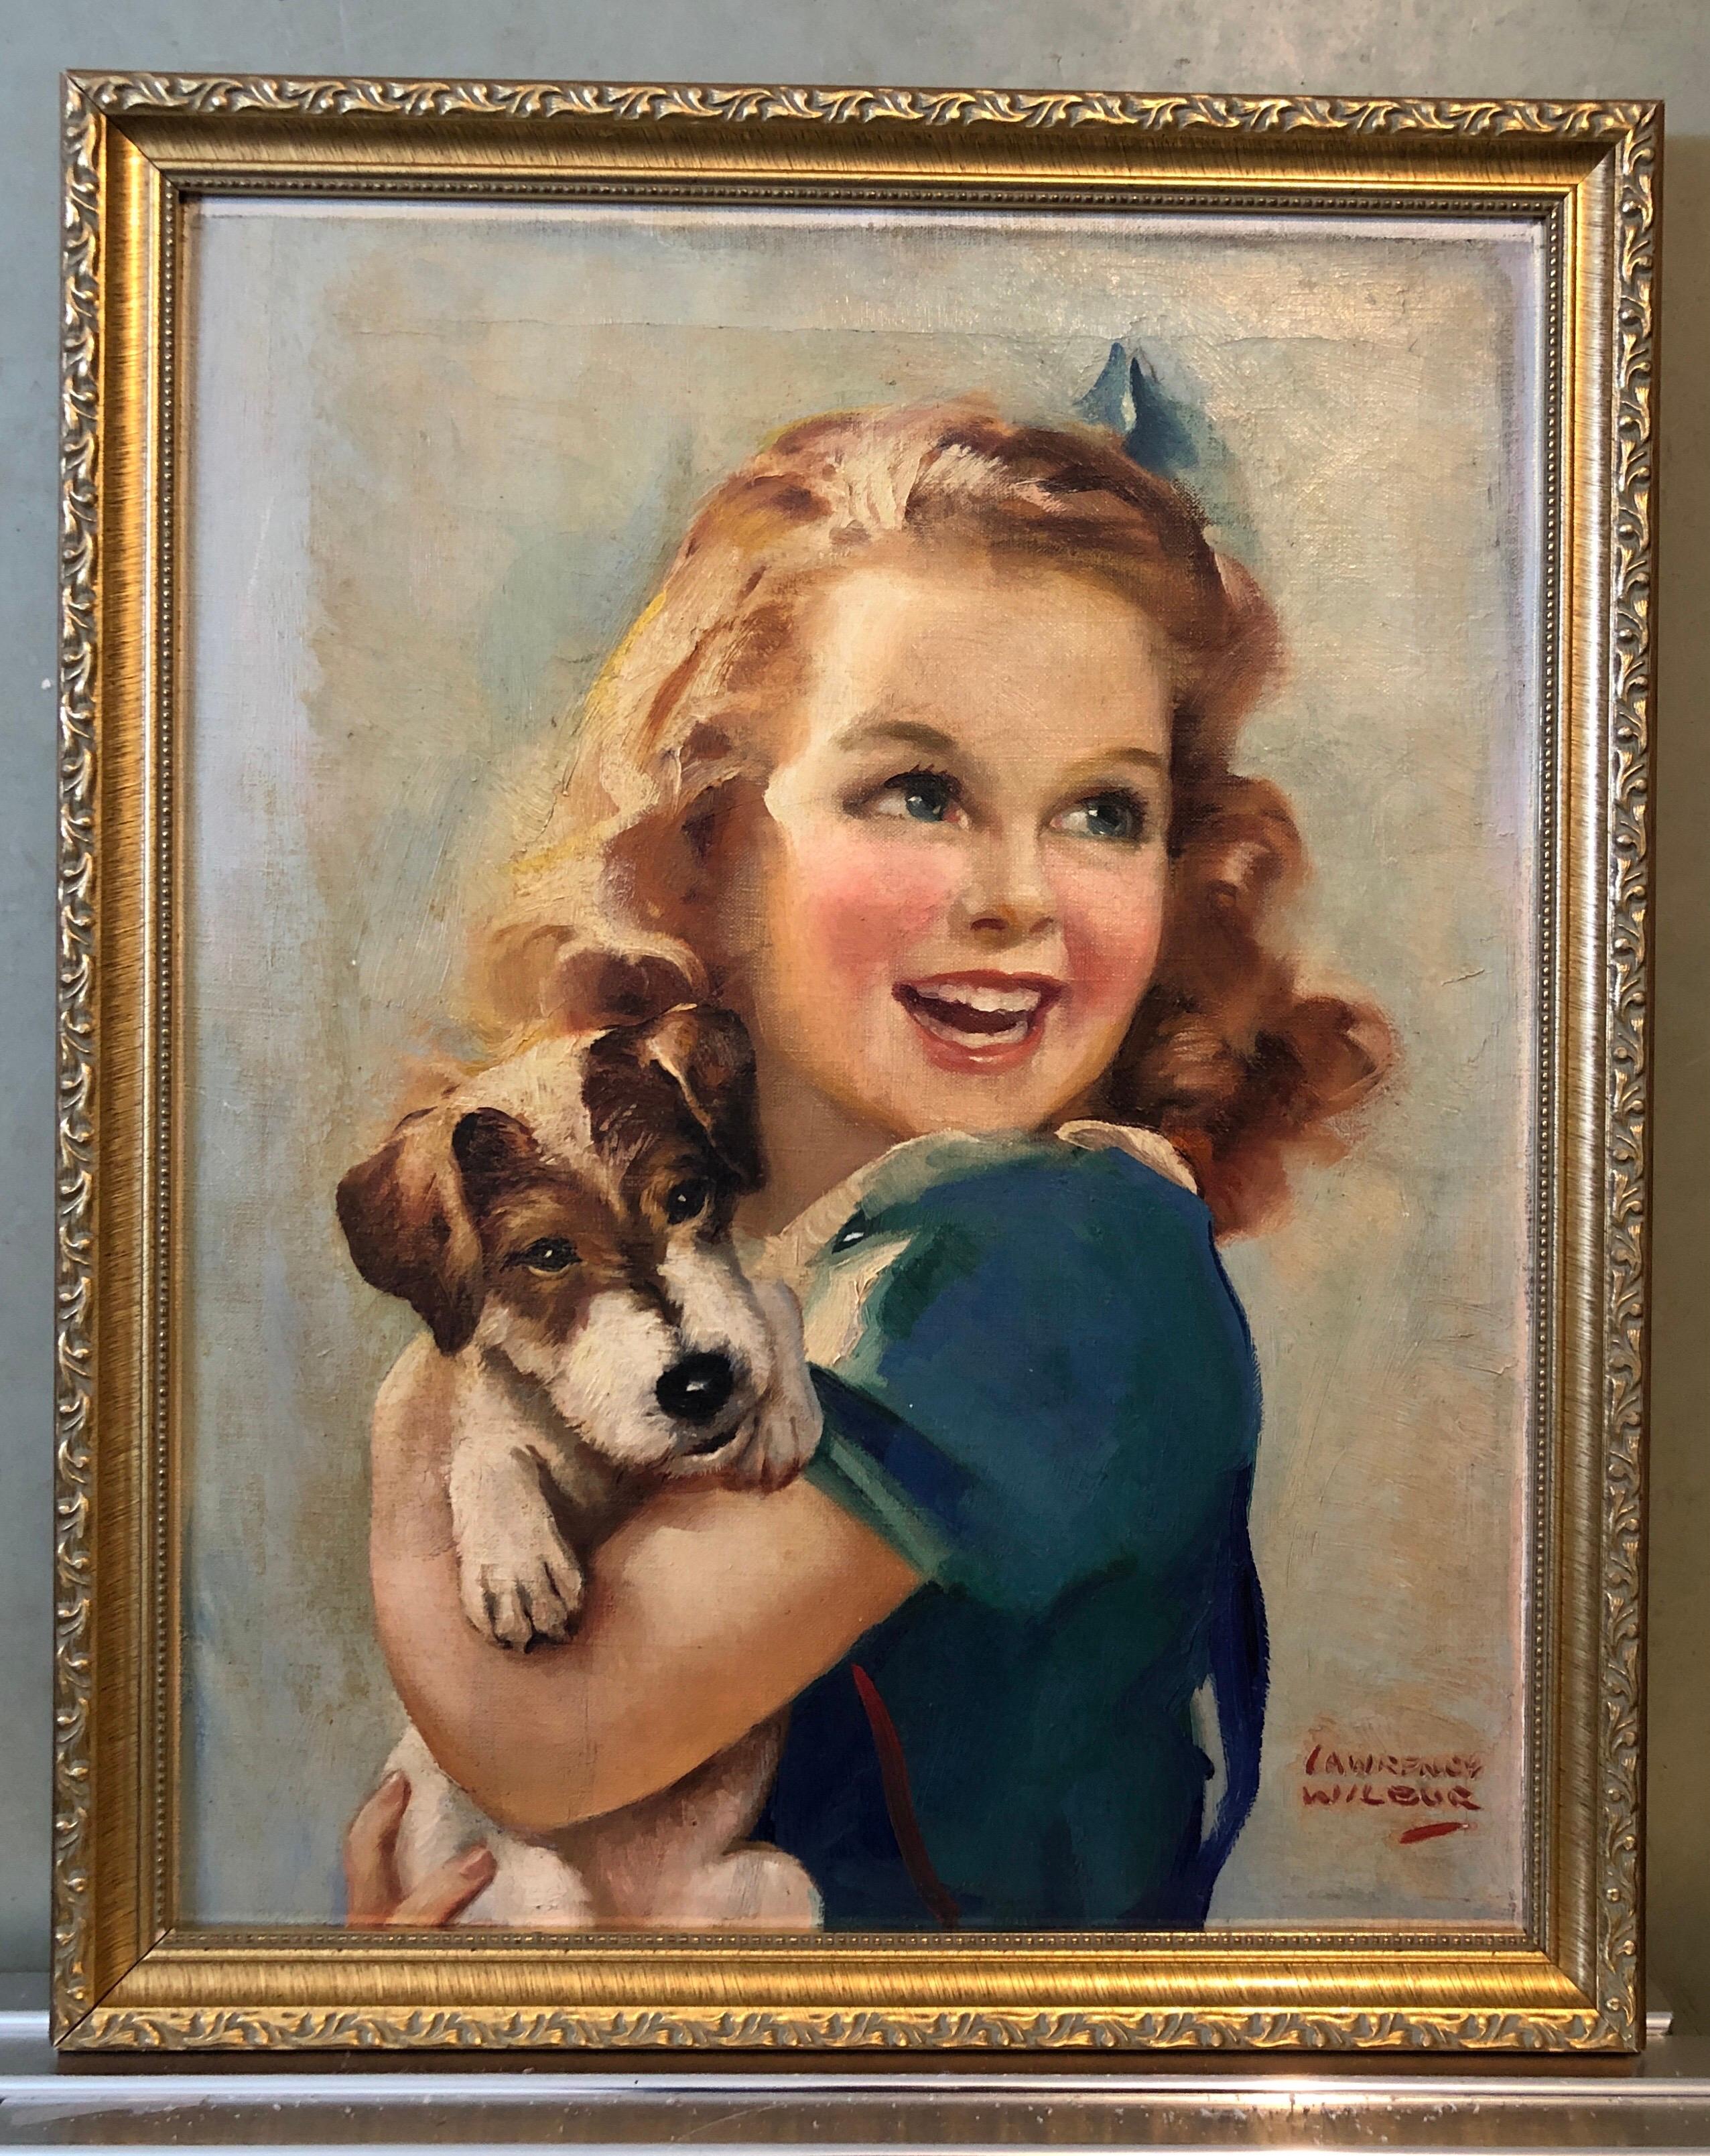 1930s Vintage Oil Painting Girl, Puppy Dog, American Illustrator Lawrence Wilbur For Sale 3